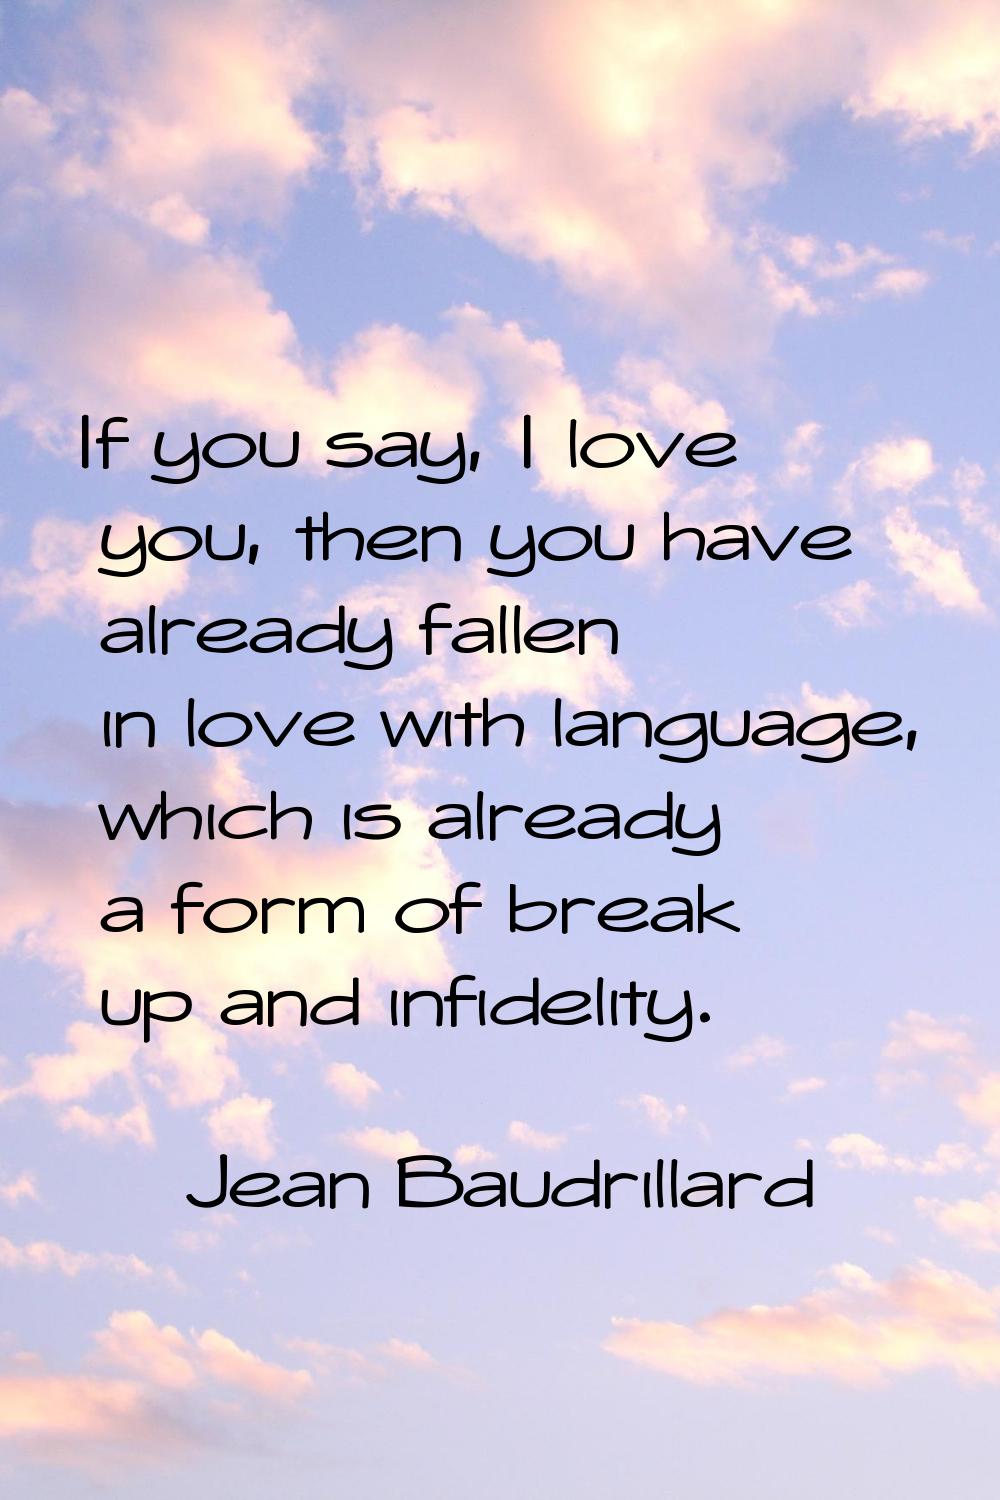 If you say, I love you, then you have already fallen in love with language, which is already a form